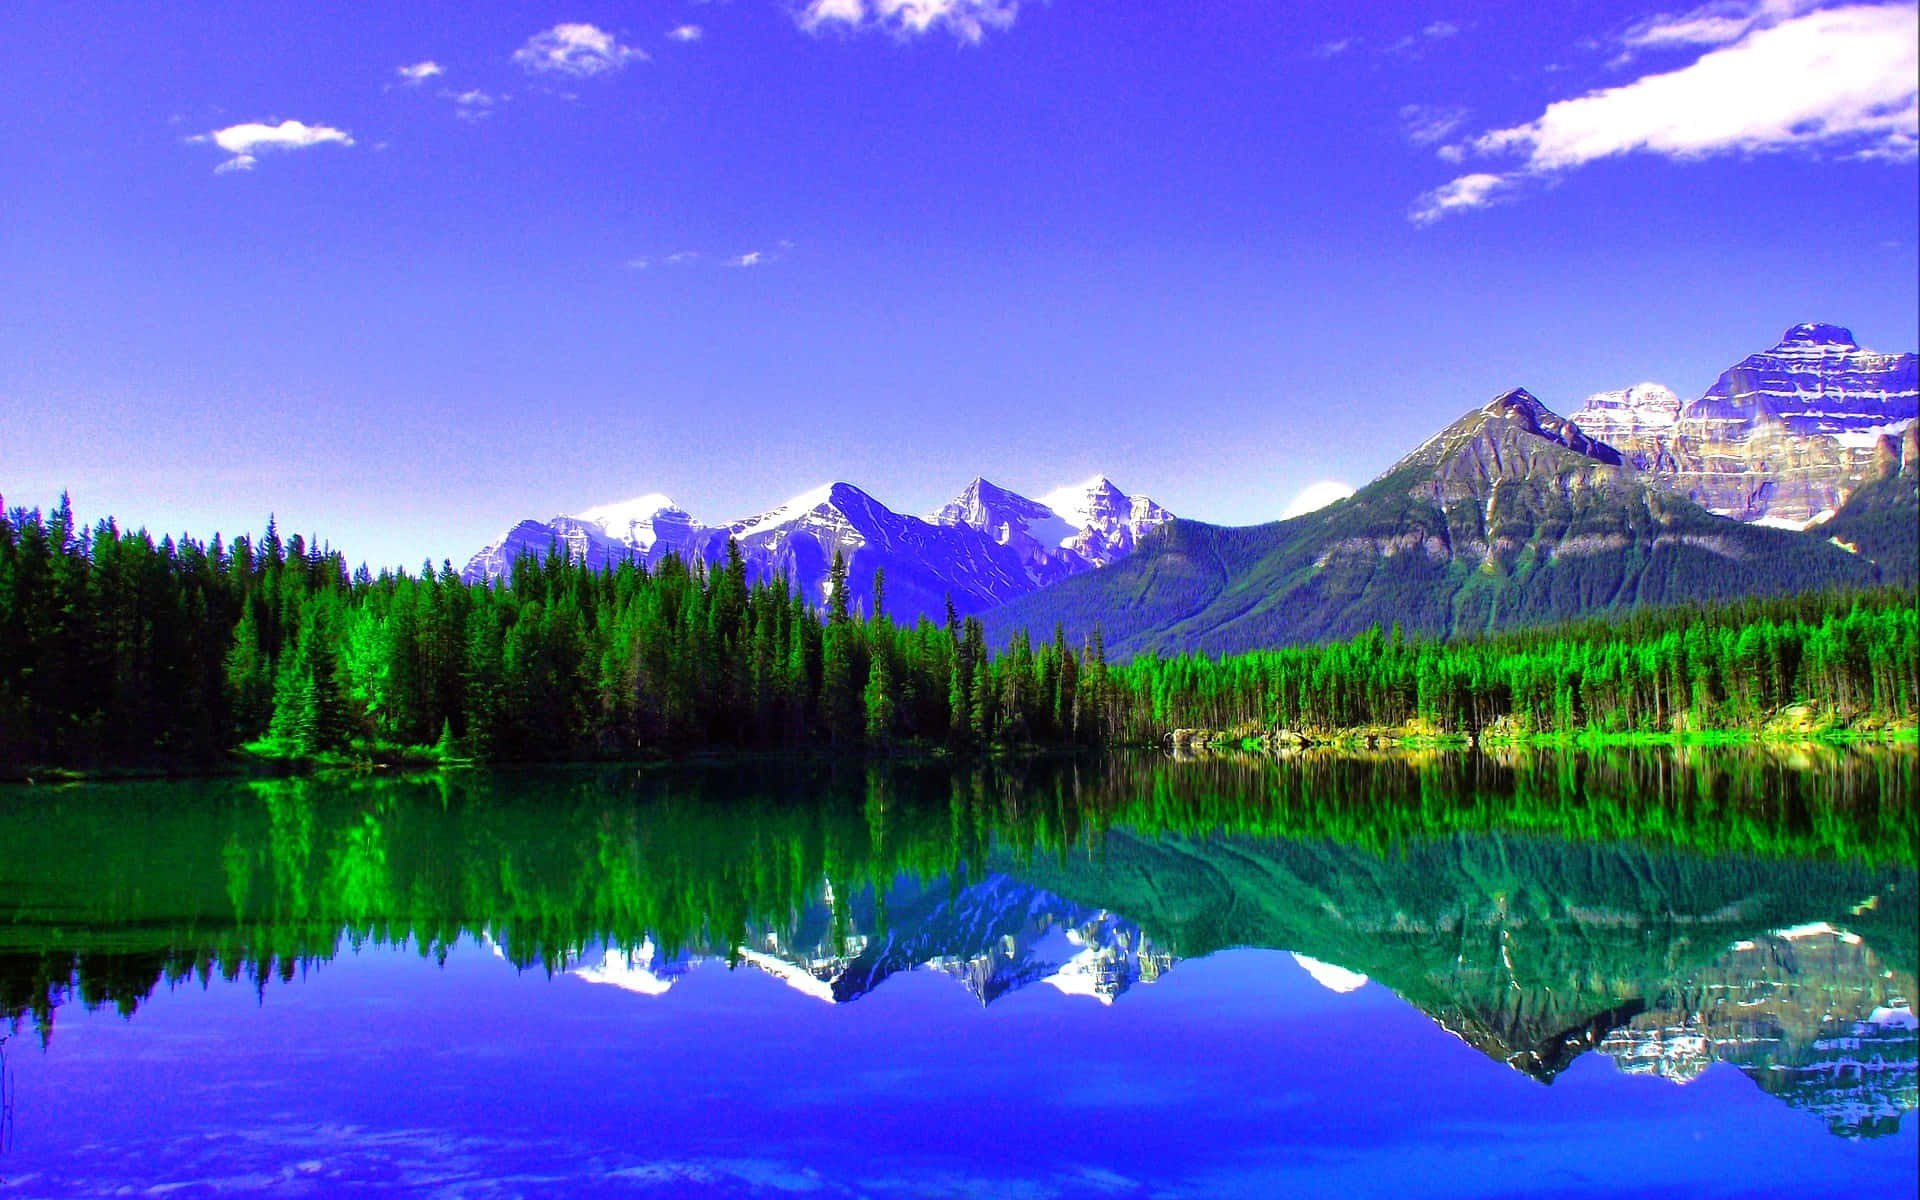 A Lake With Mountains Reflected In It